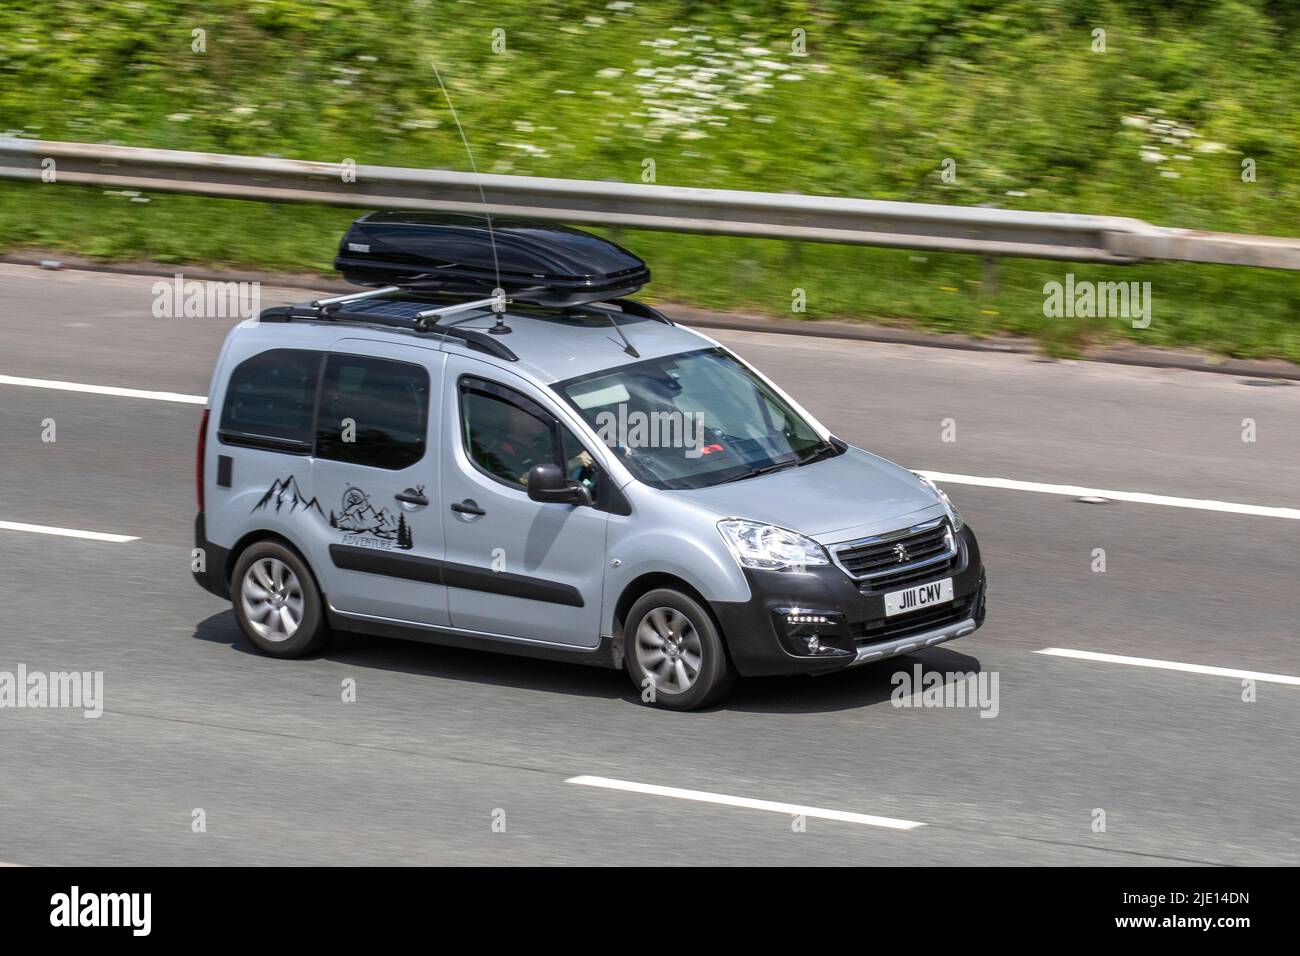 2018 silver Peugeot Partner Tepee Outdoor Adventure Bhdi S/S Bluehdi 120 DPF small MPV diesel 1560cc; travelling on the M61 Motorway, Manchester, UK Stock Photo